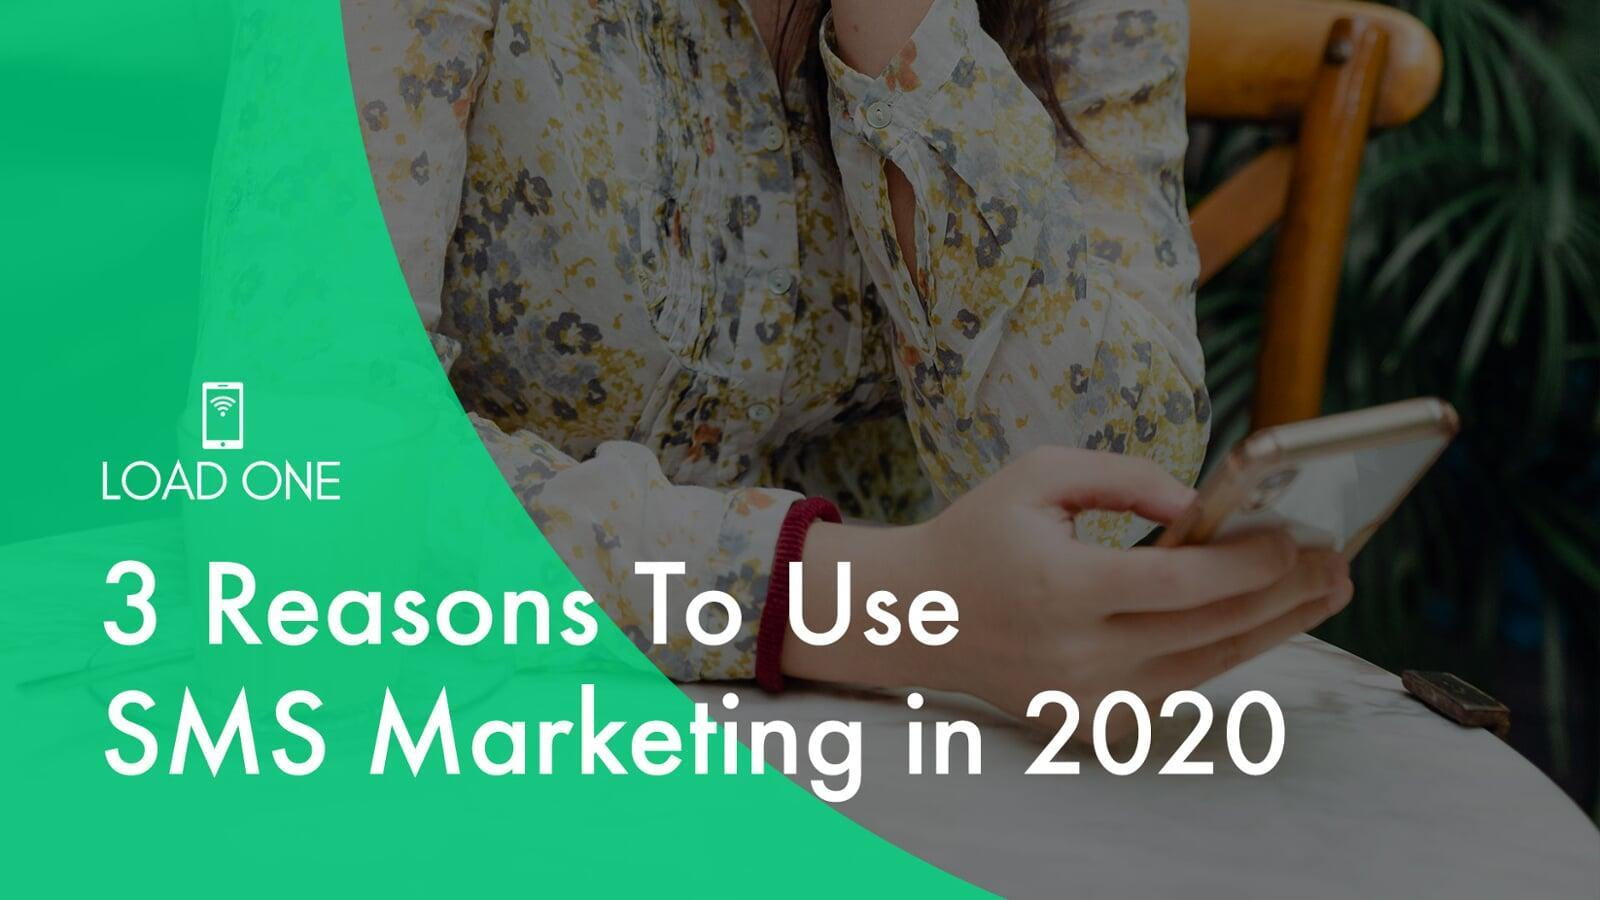 3 Reasons To Use SMS Marketing in 2020